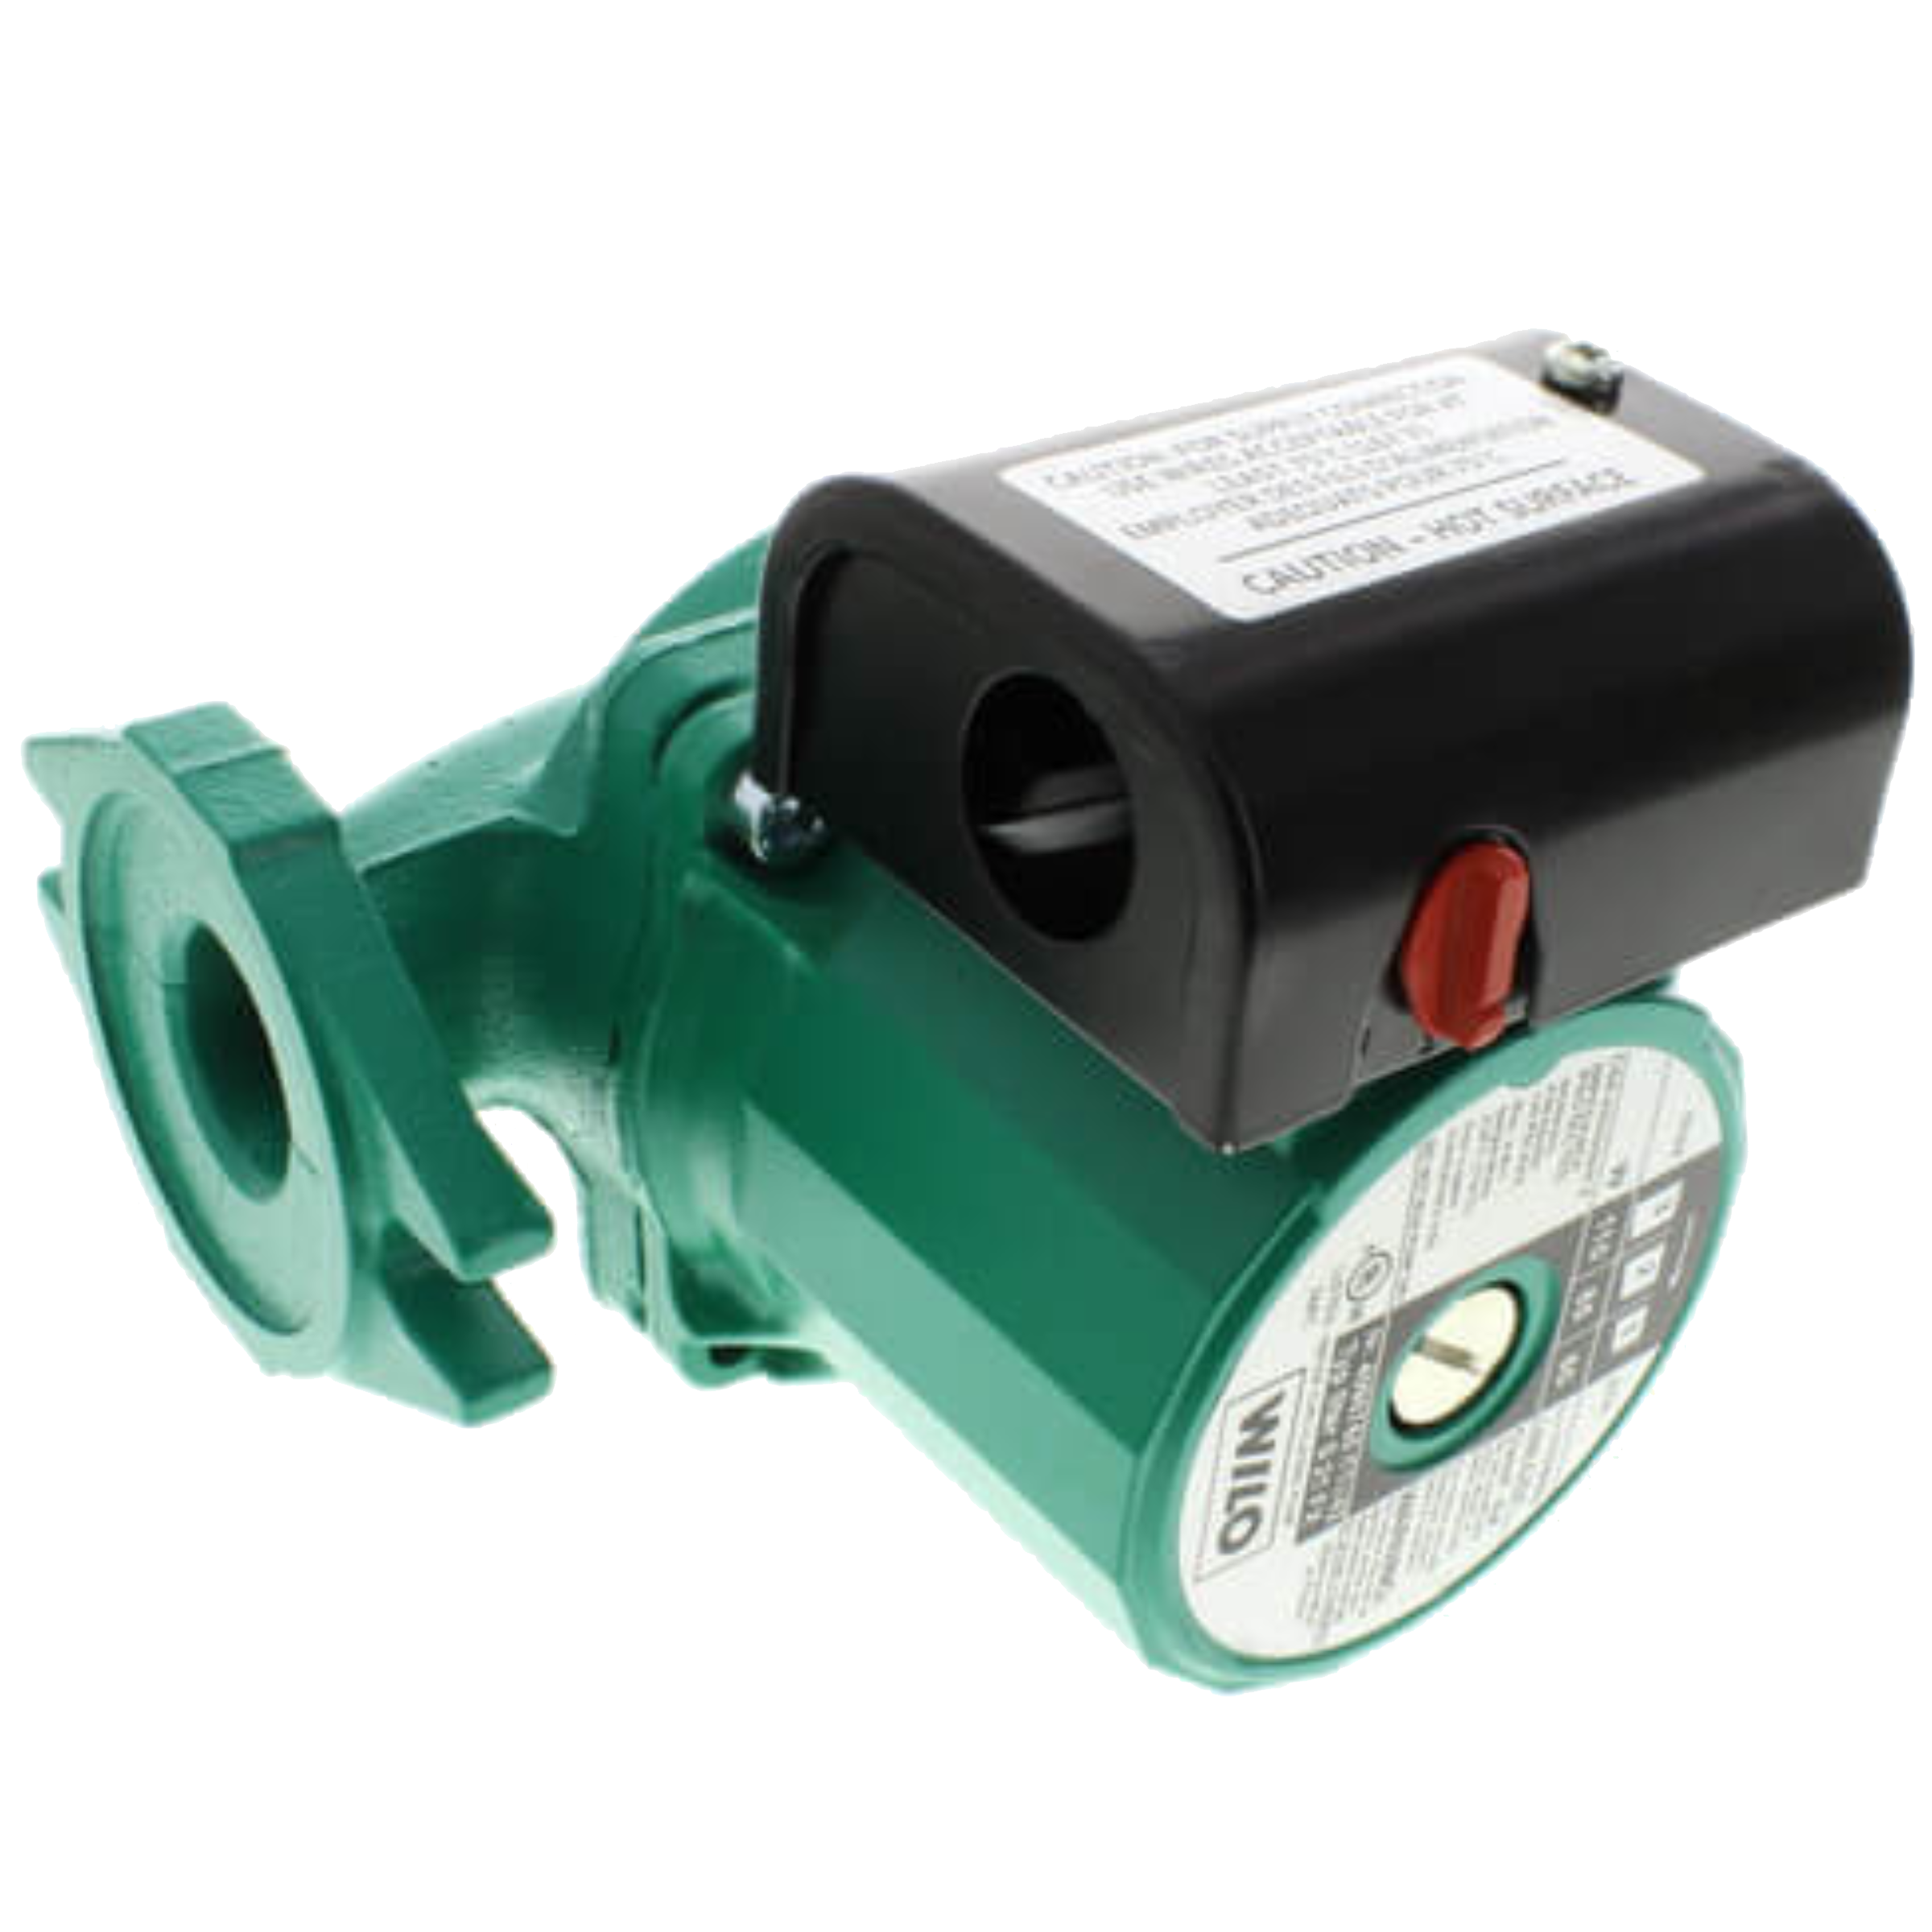 Star S 21 FX Wilo Star S Star S Series Cast Iron 3-Speed Residential Circulating Pump Max Flow 19 USGPM, 140 Psi, 115V/60HZ/1Ph, 1/25 HP